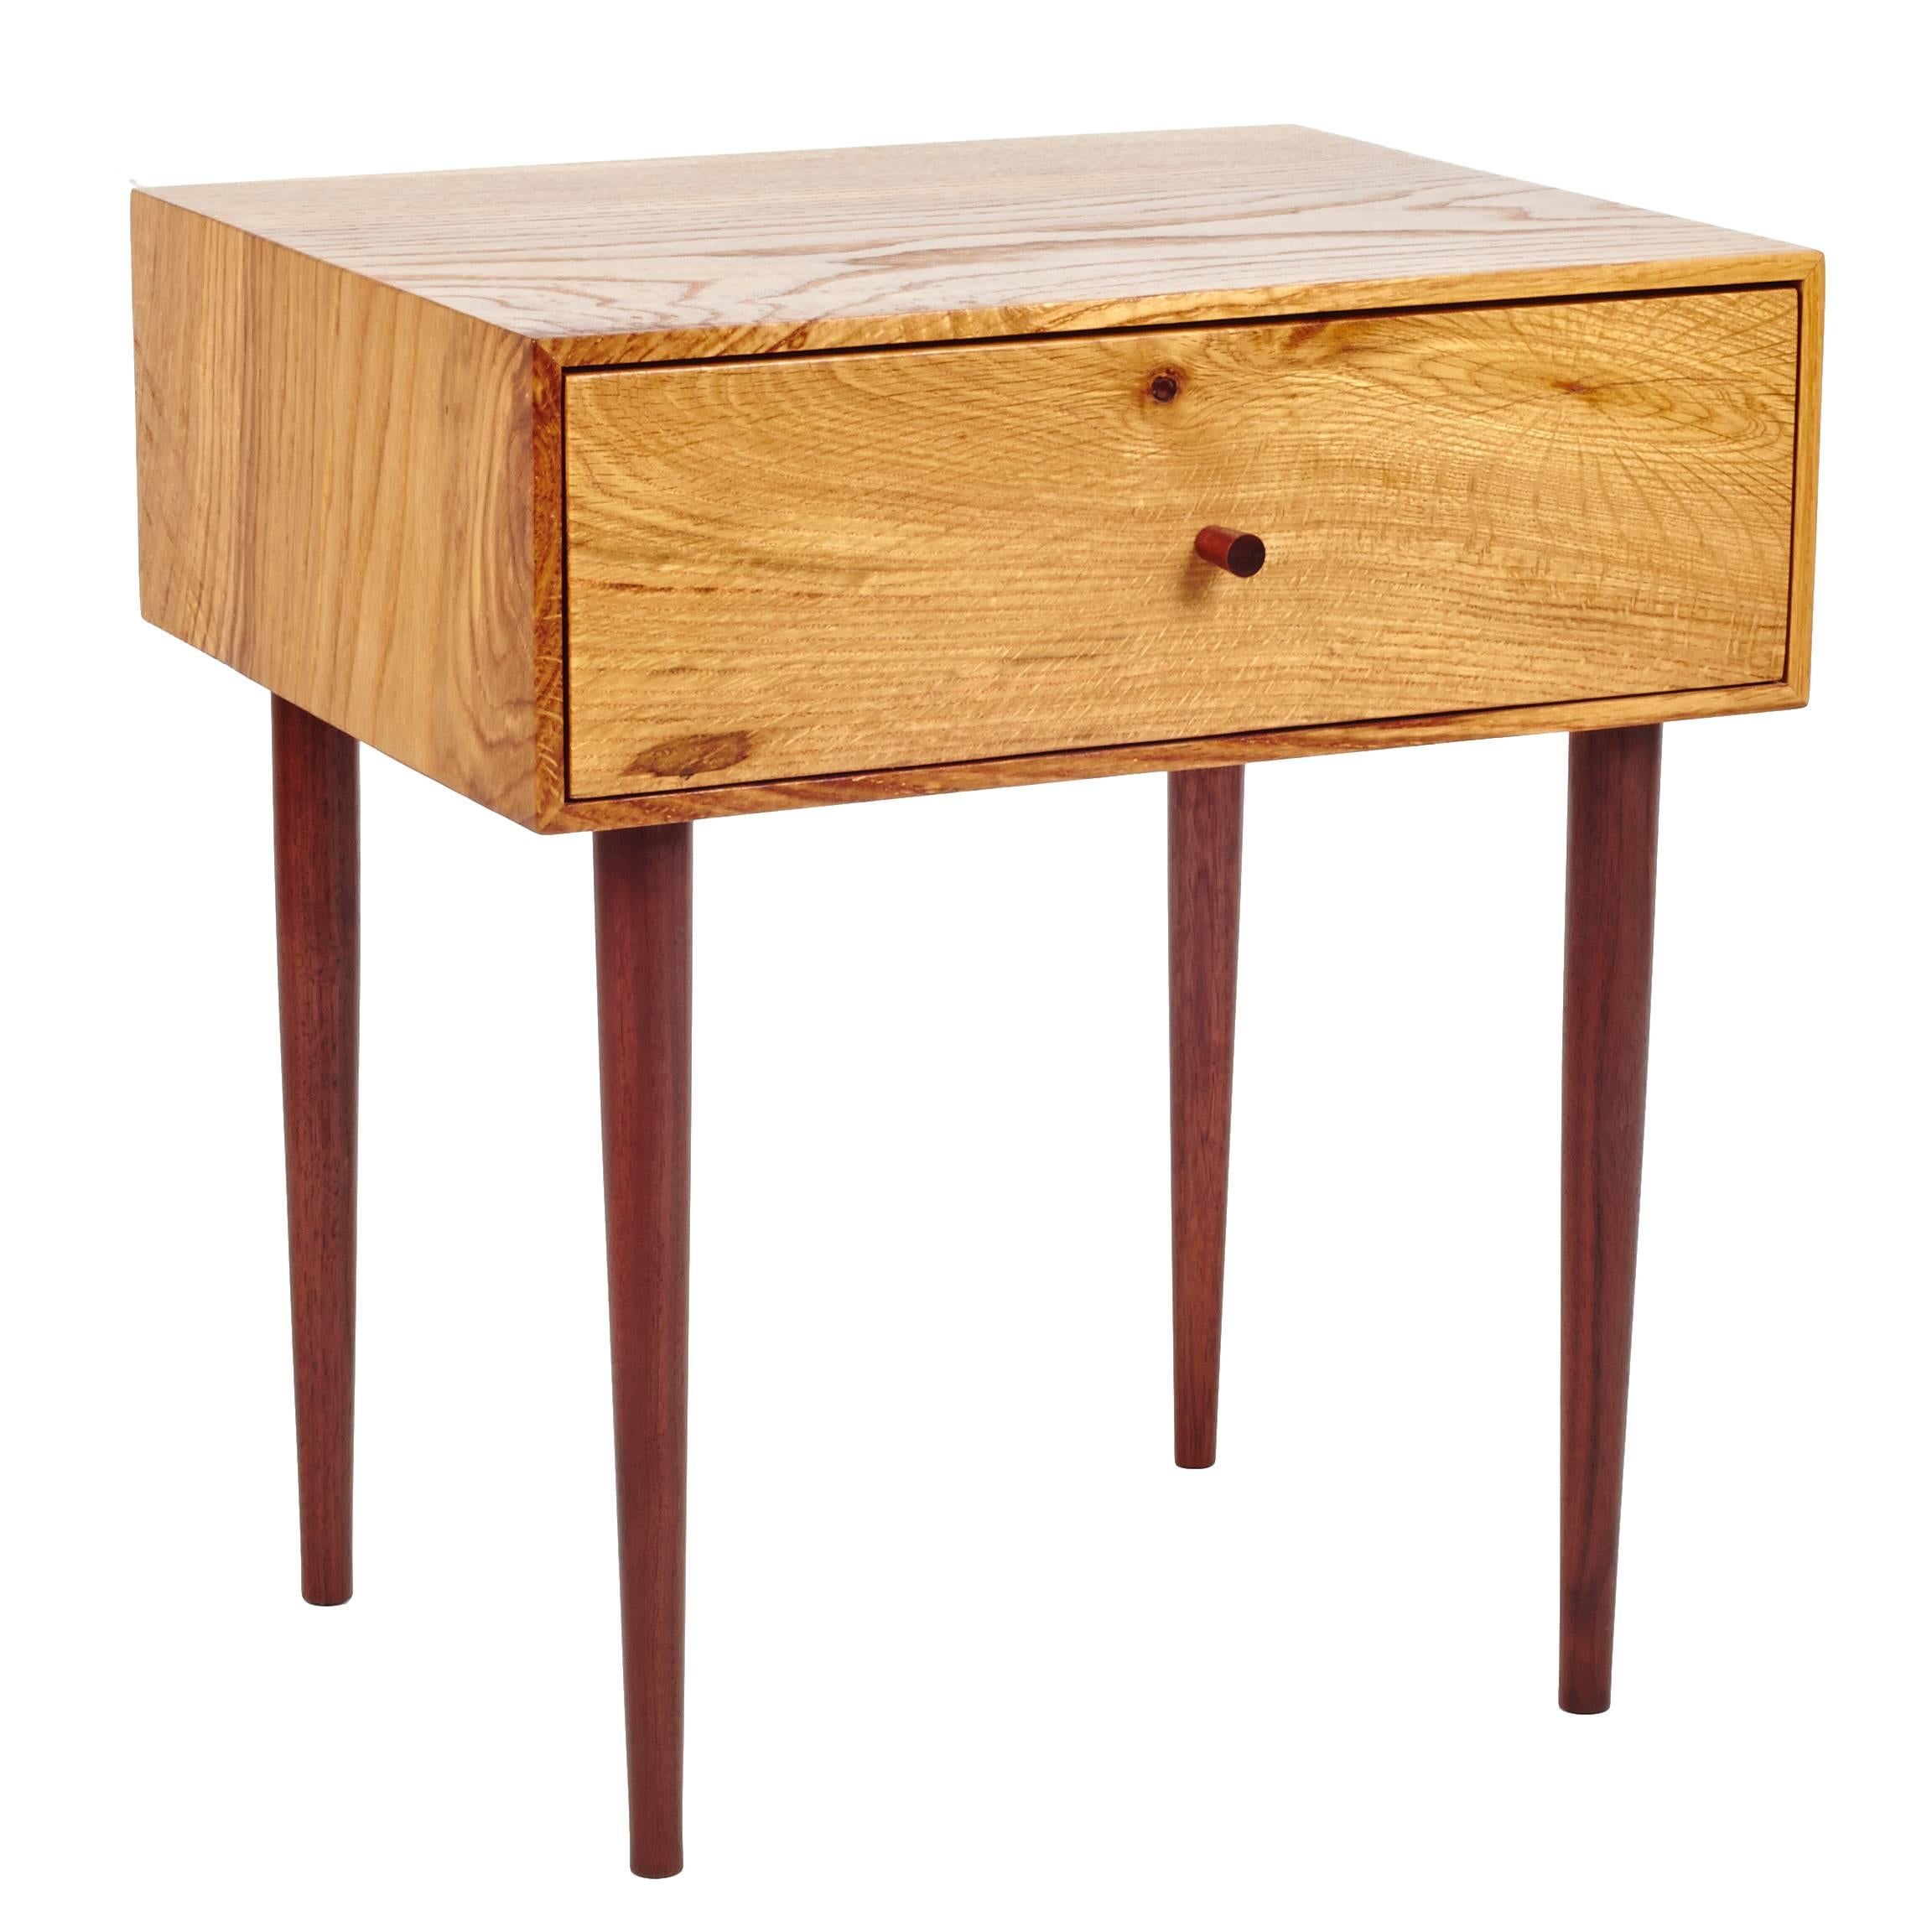 End Table in Chestnut Oak and Hand-Turned Walnut with a Single Drawer